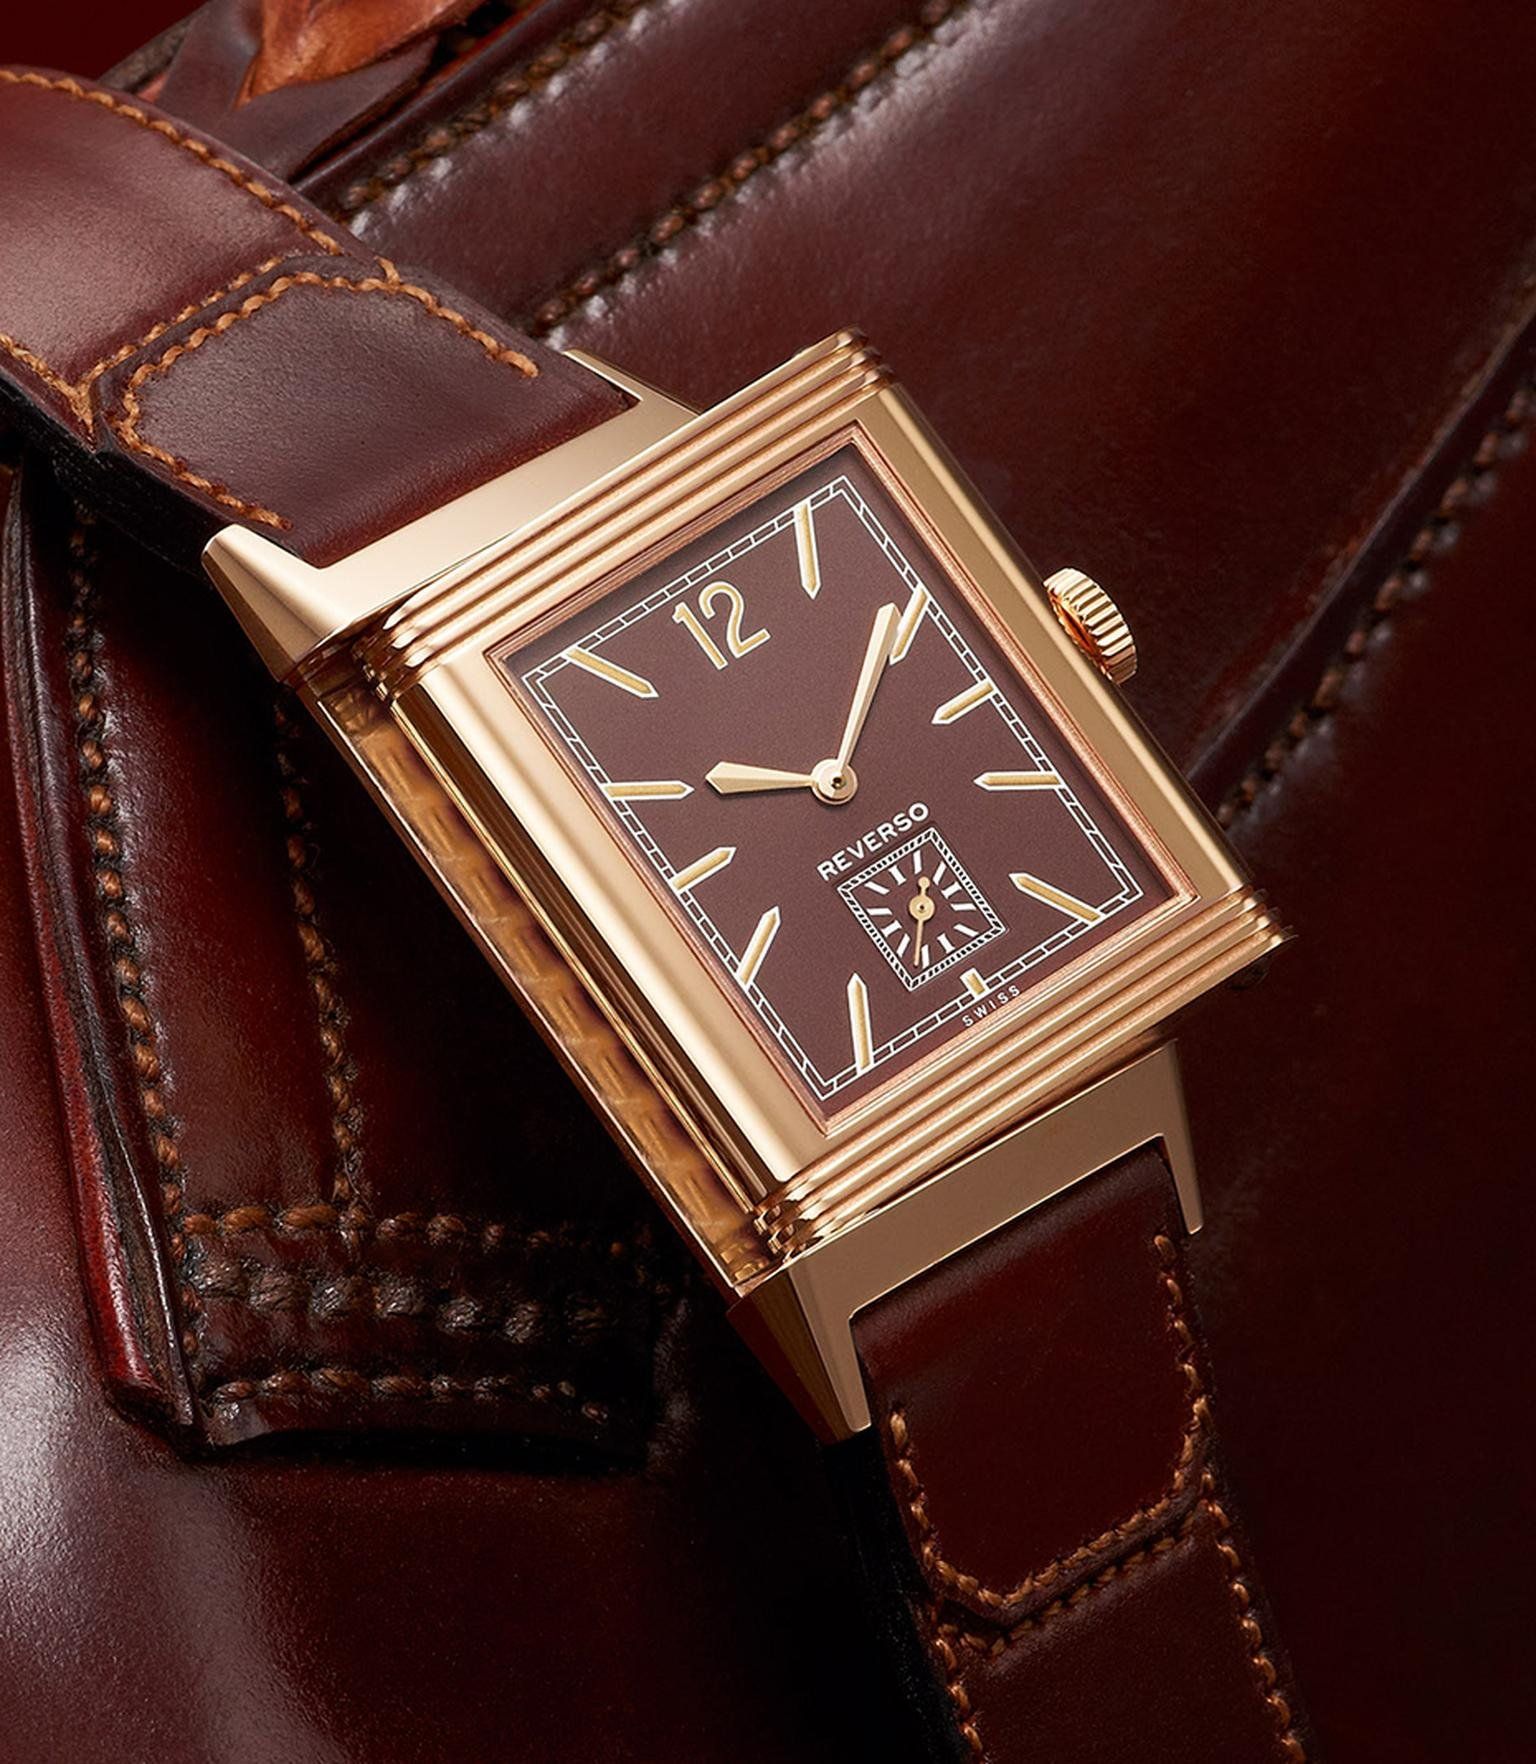 Grande Reverso Ultra Thin 1931 with its chocolate dial